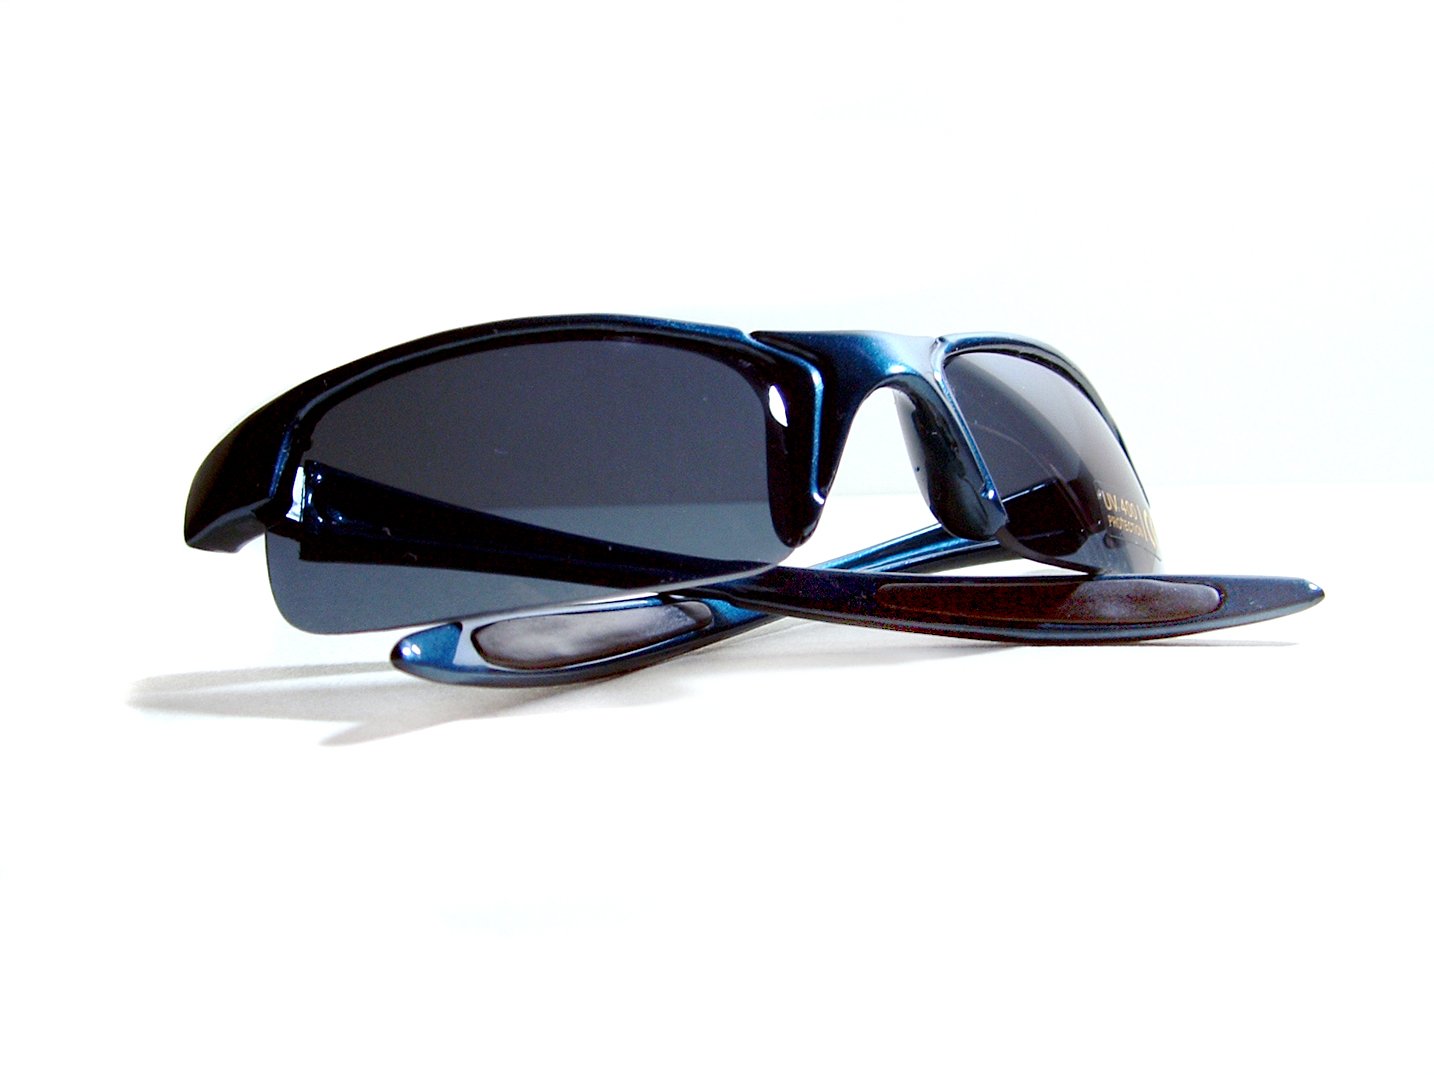 a pair of blue sunglasses and black frame sit on a white background